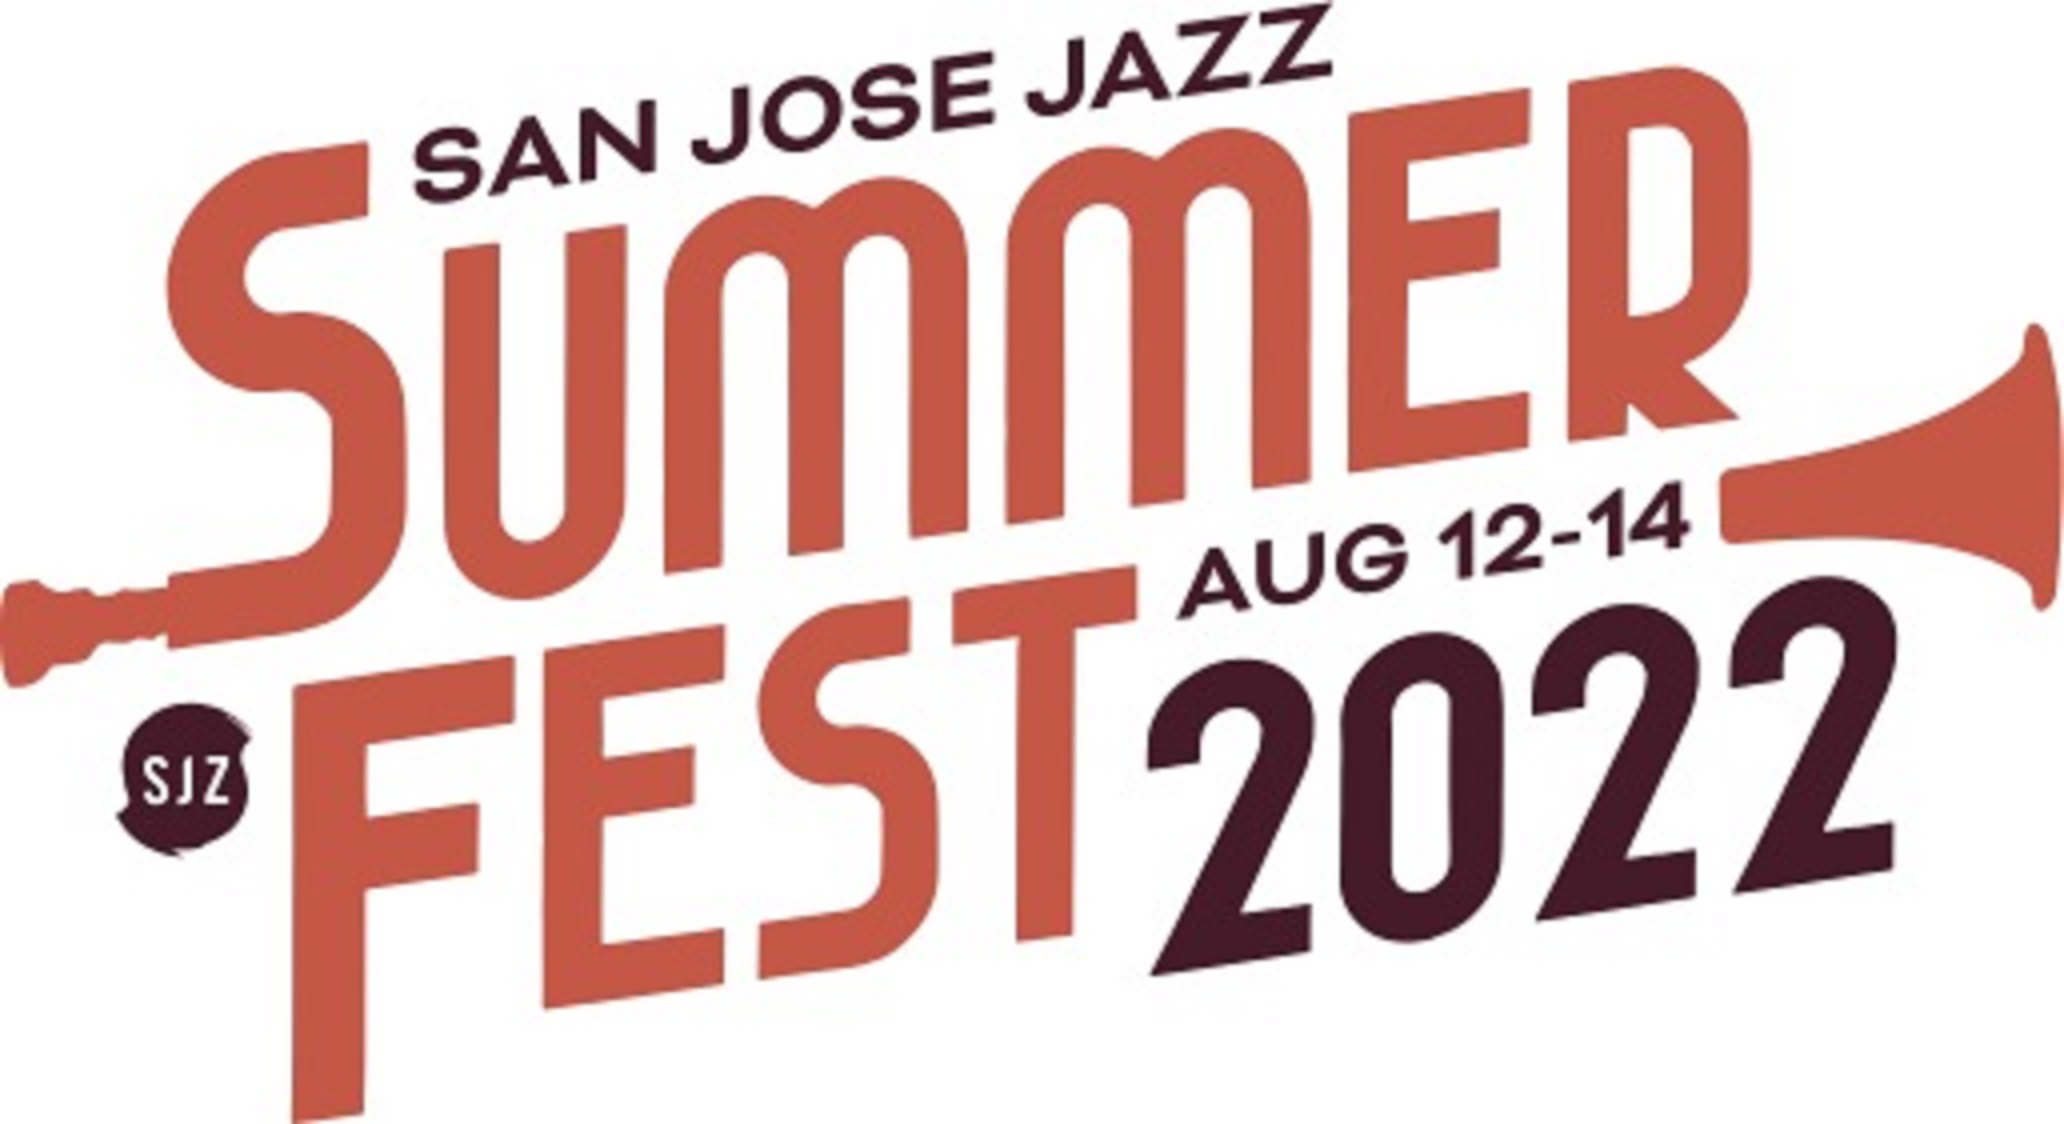 Downtown San Jose Is The Place To Be With 12 Stages of Live Music from